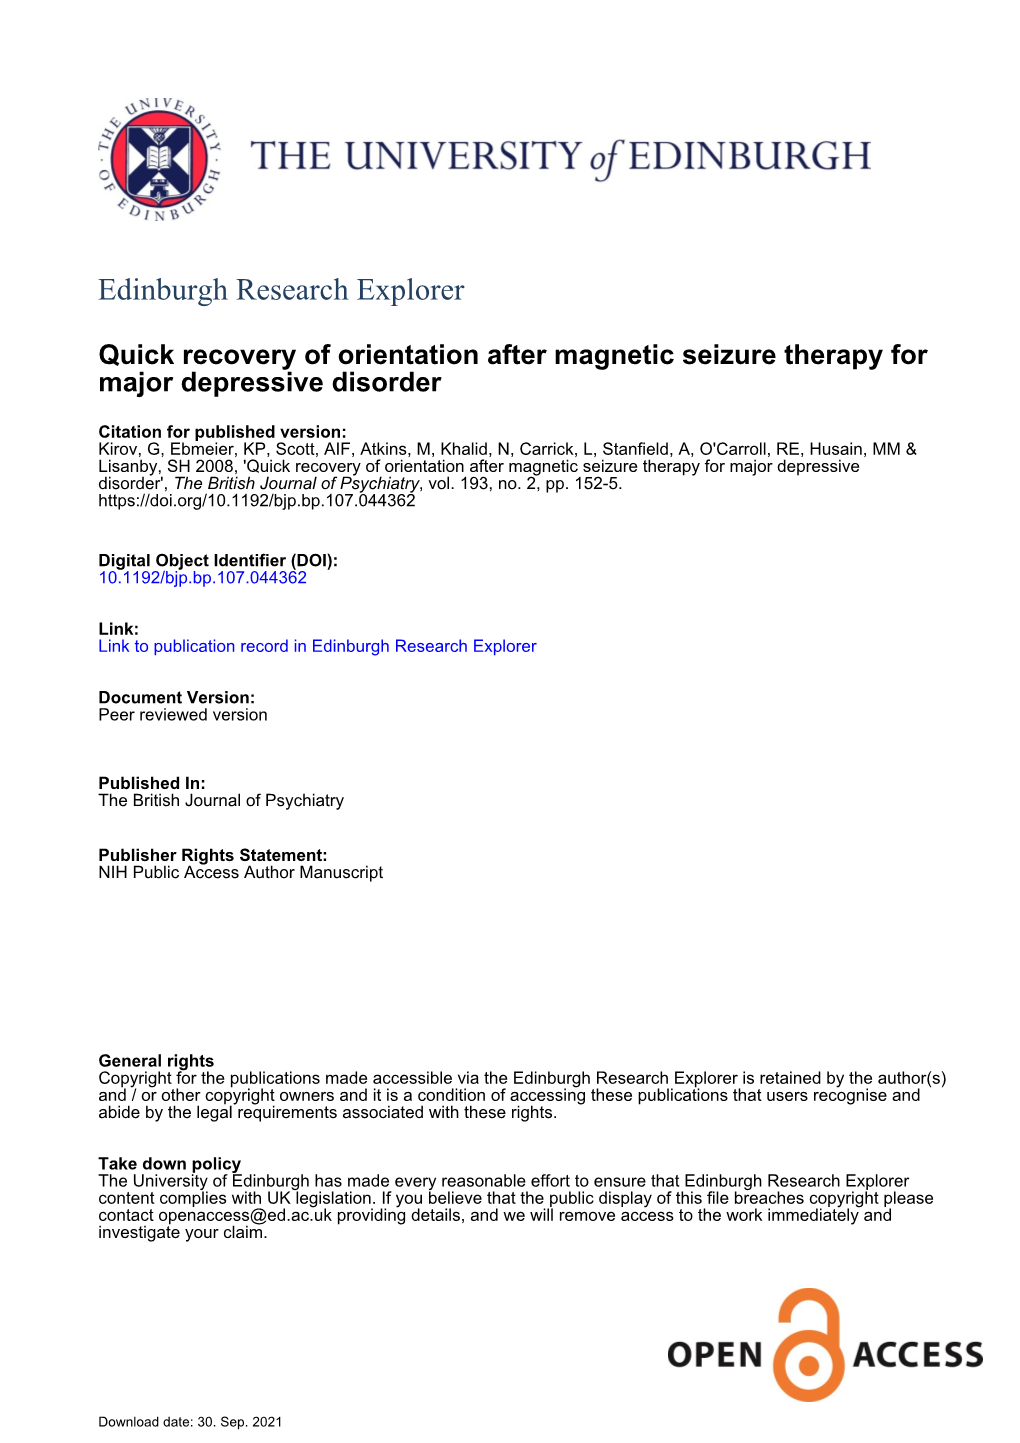 Quick Recovery of Orientation After Magnetic Seizure Therapy for Major Depressive Disorder